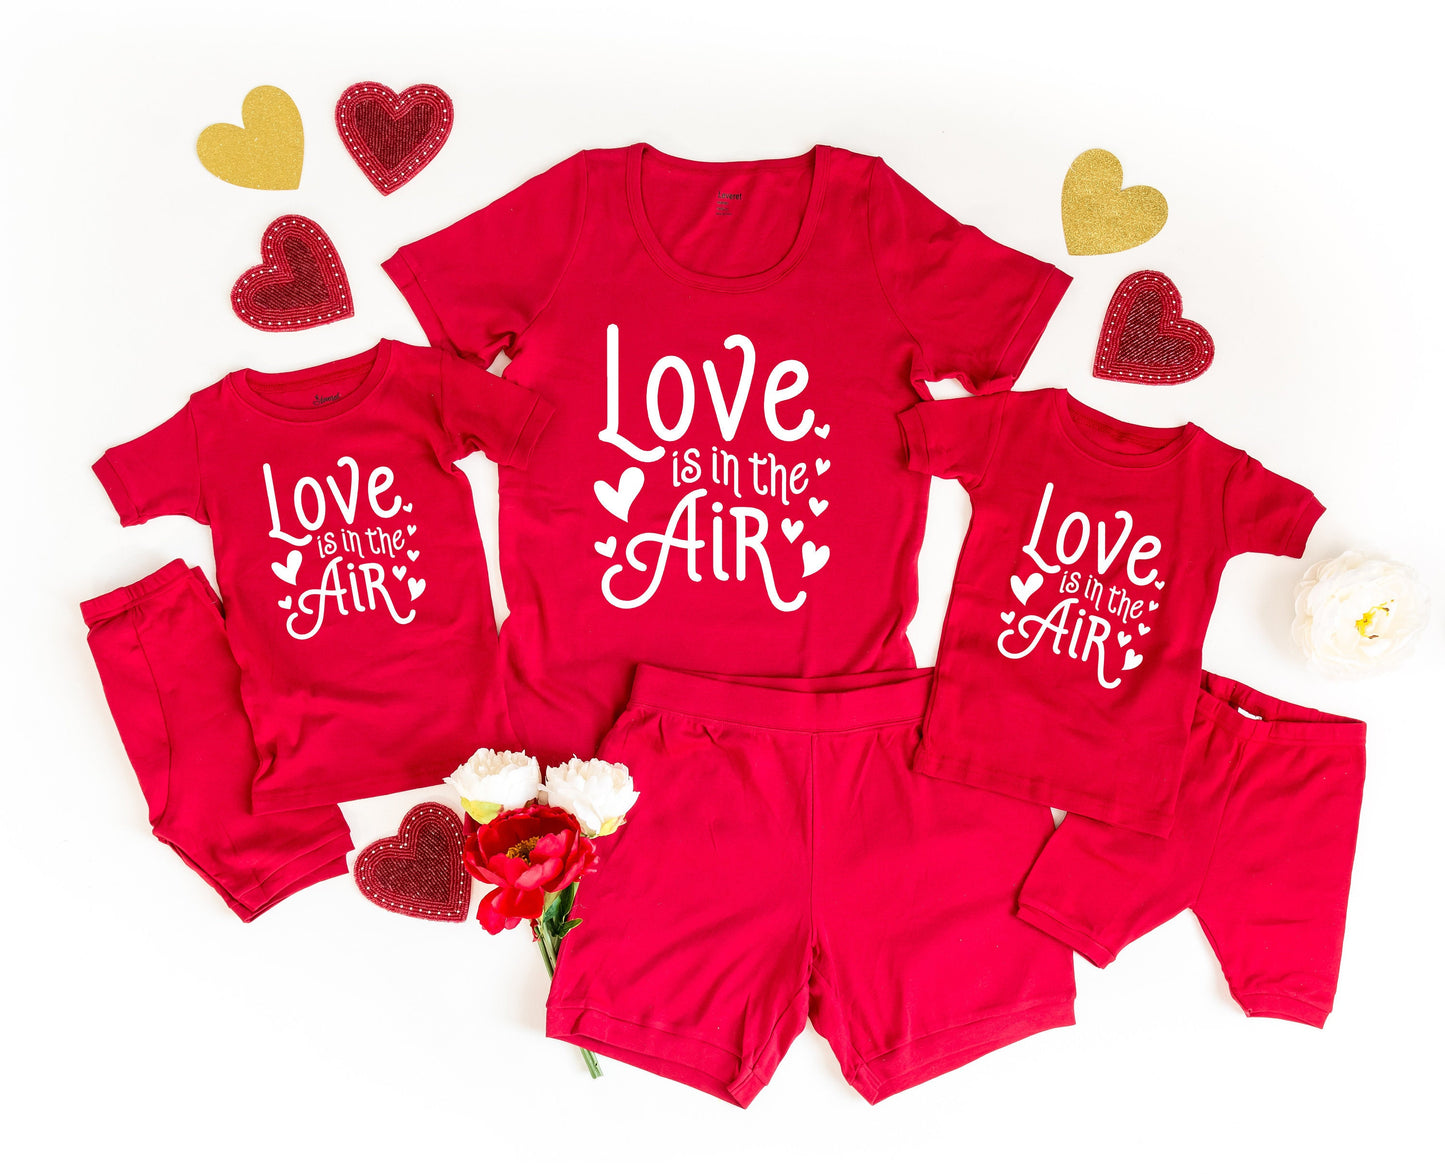 Love is in the Air Red Shorts Pajamas - toddler girl pjs - womens shorts set - girls valentines pajamas - mommy and me pajamas